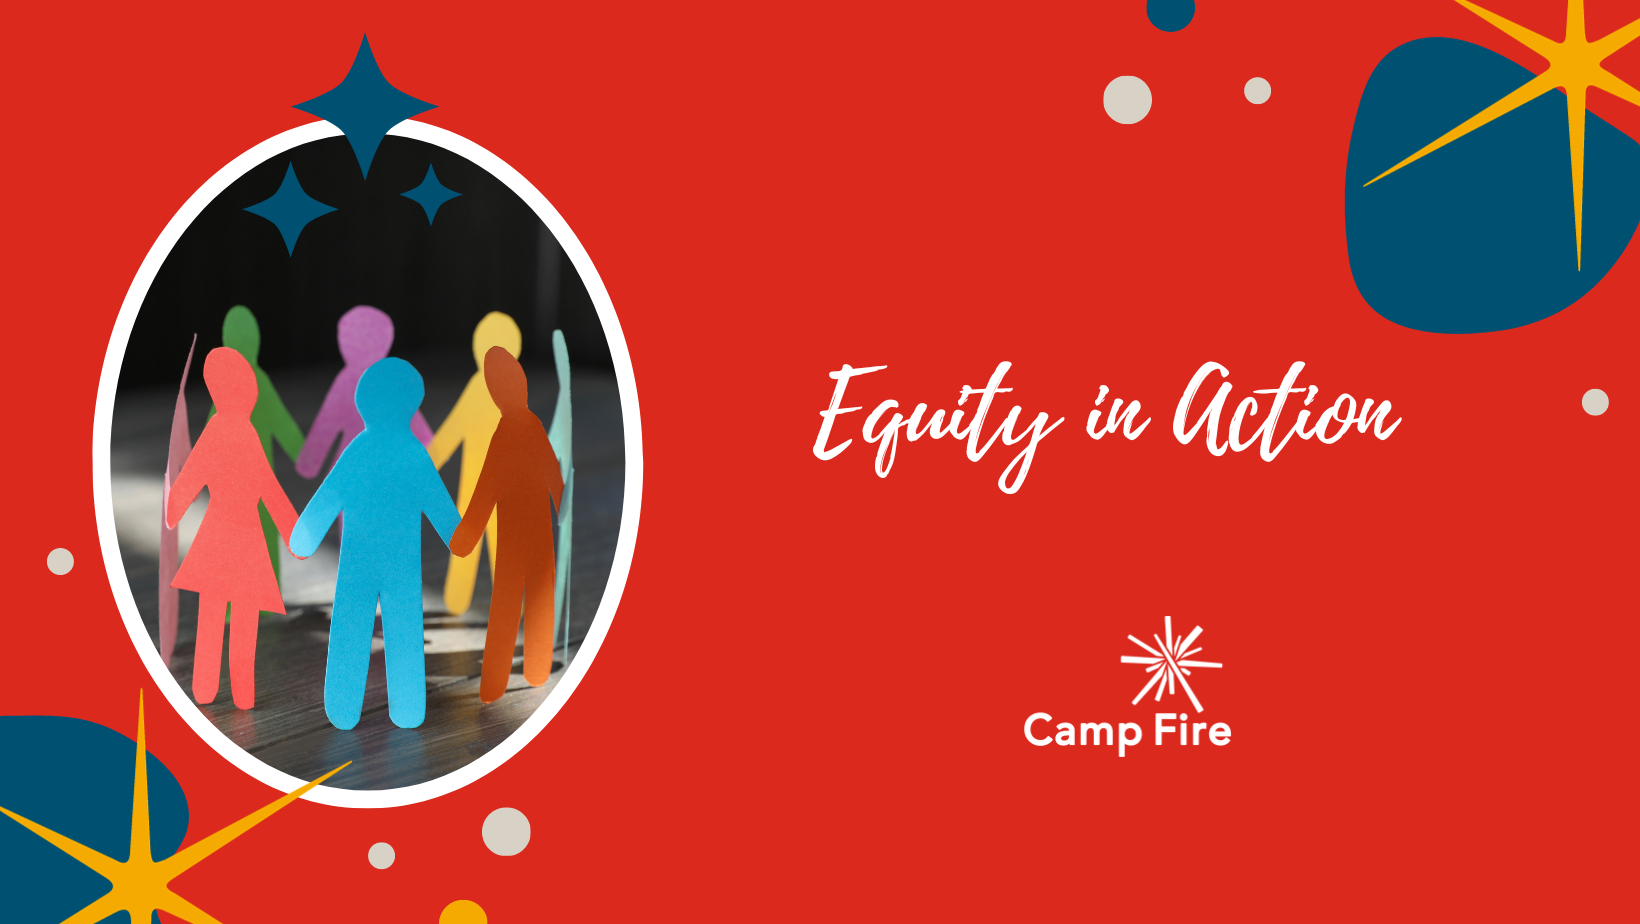 Equity in Action, a Camp Fire blog